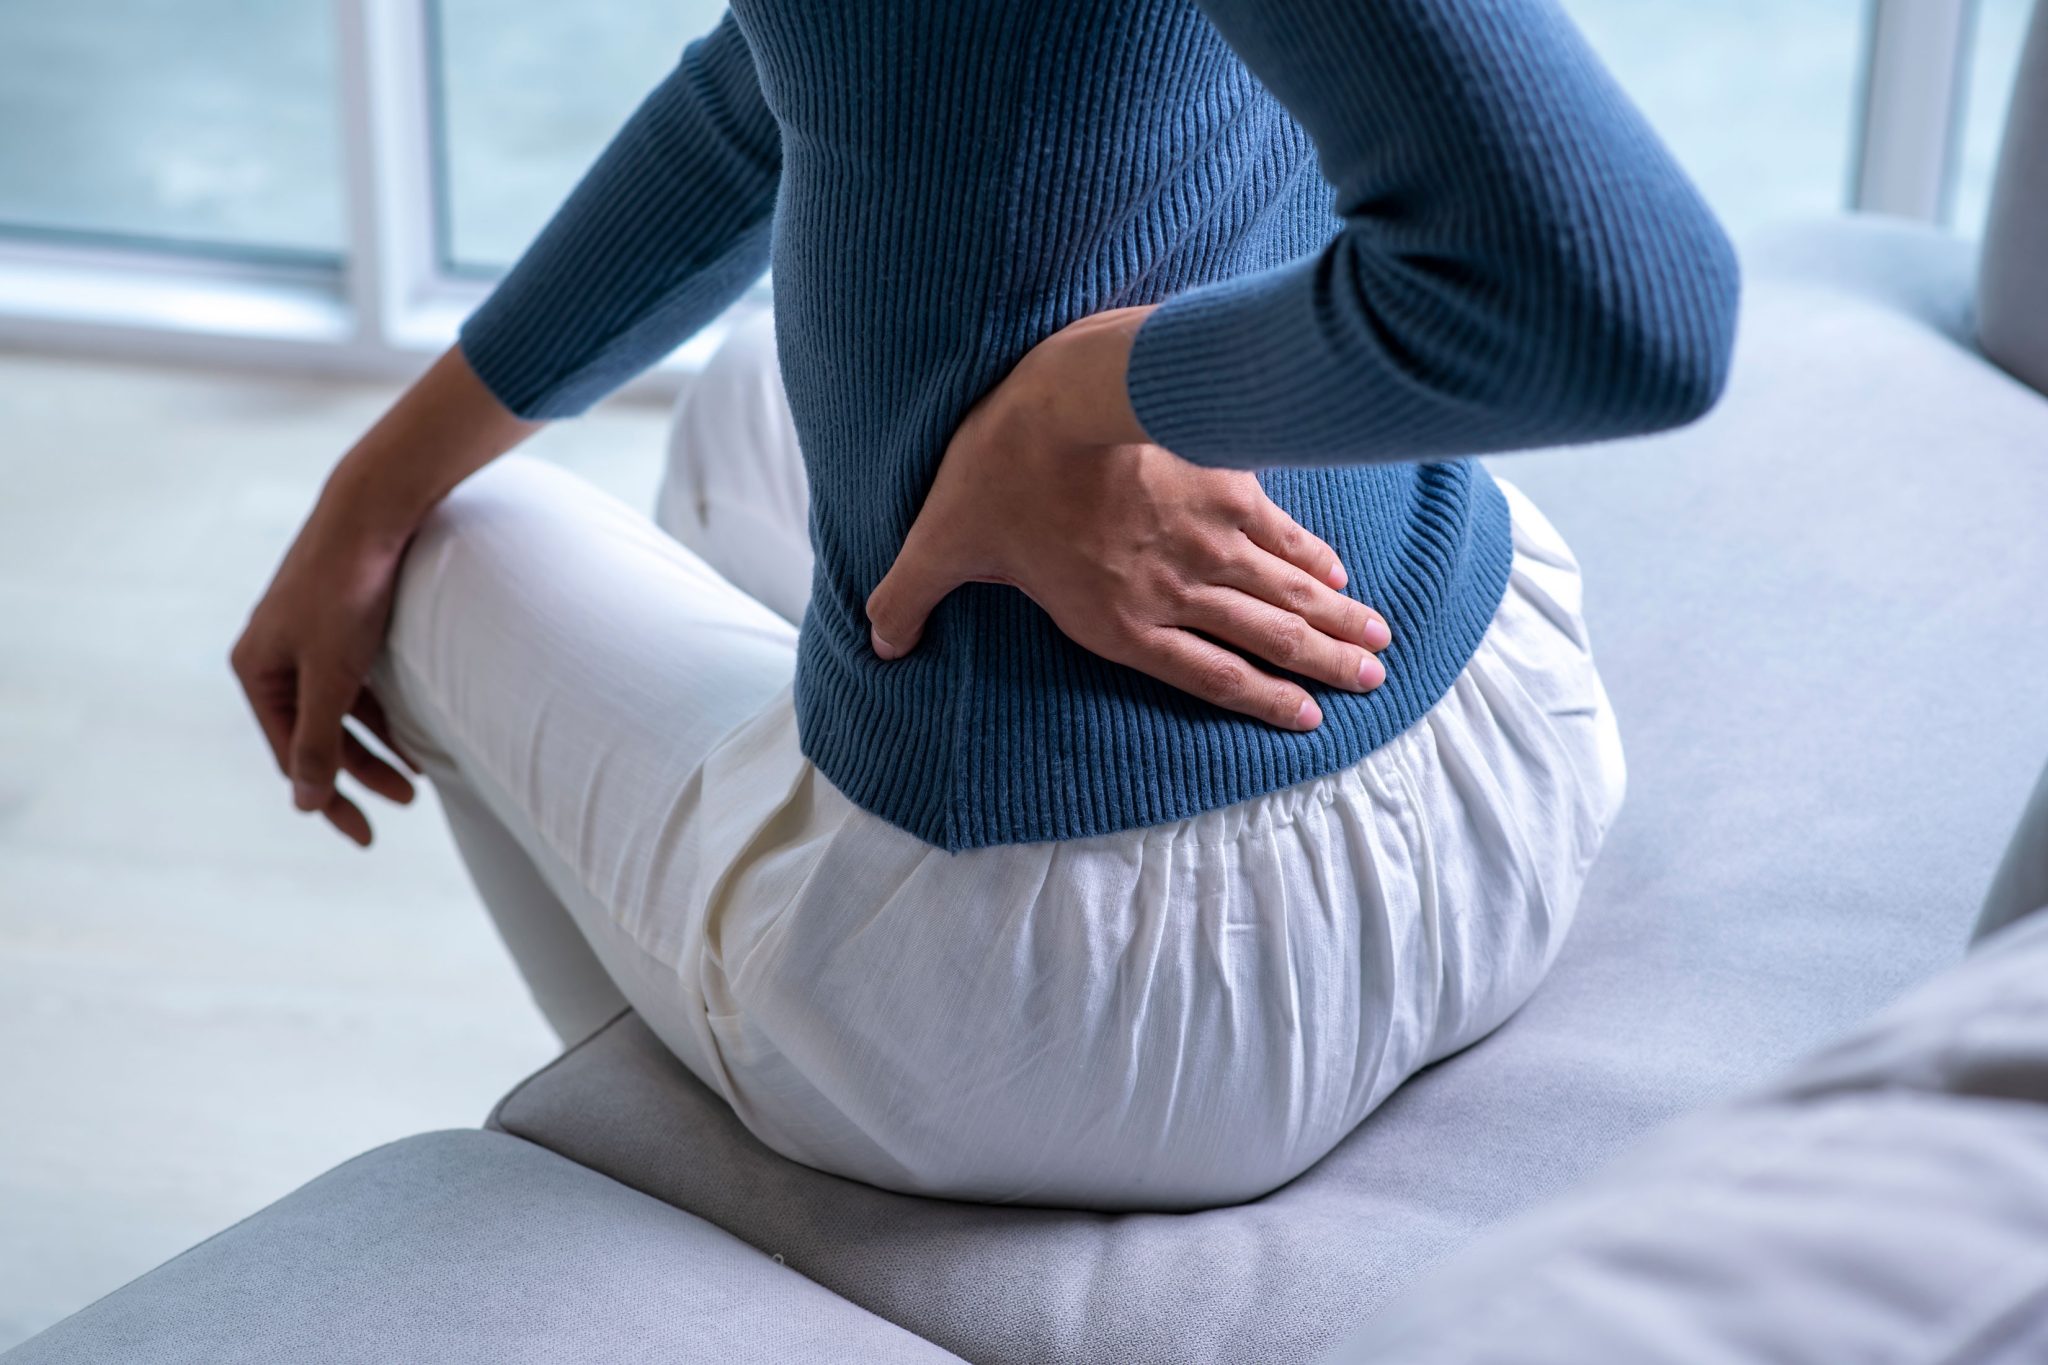 5 Tips on How to Sit with Piriformis Syndrome